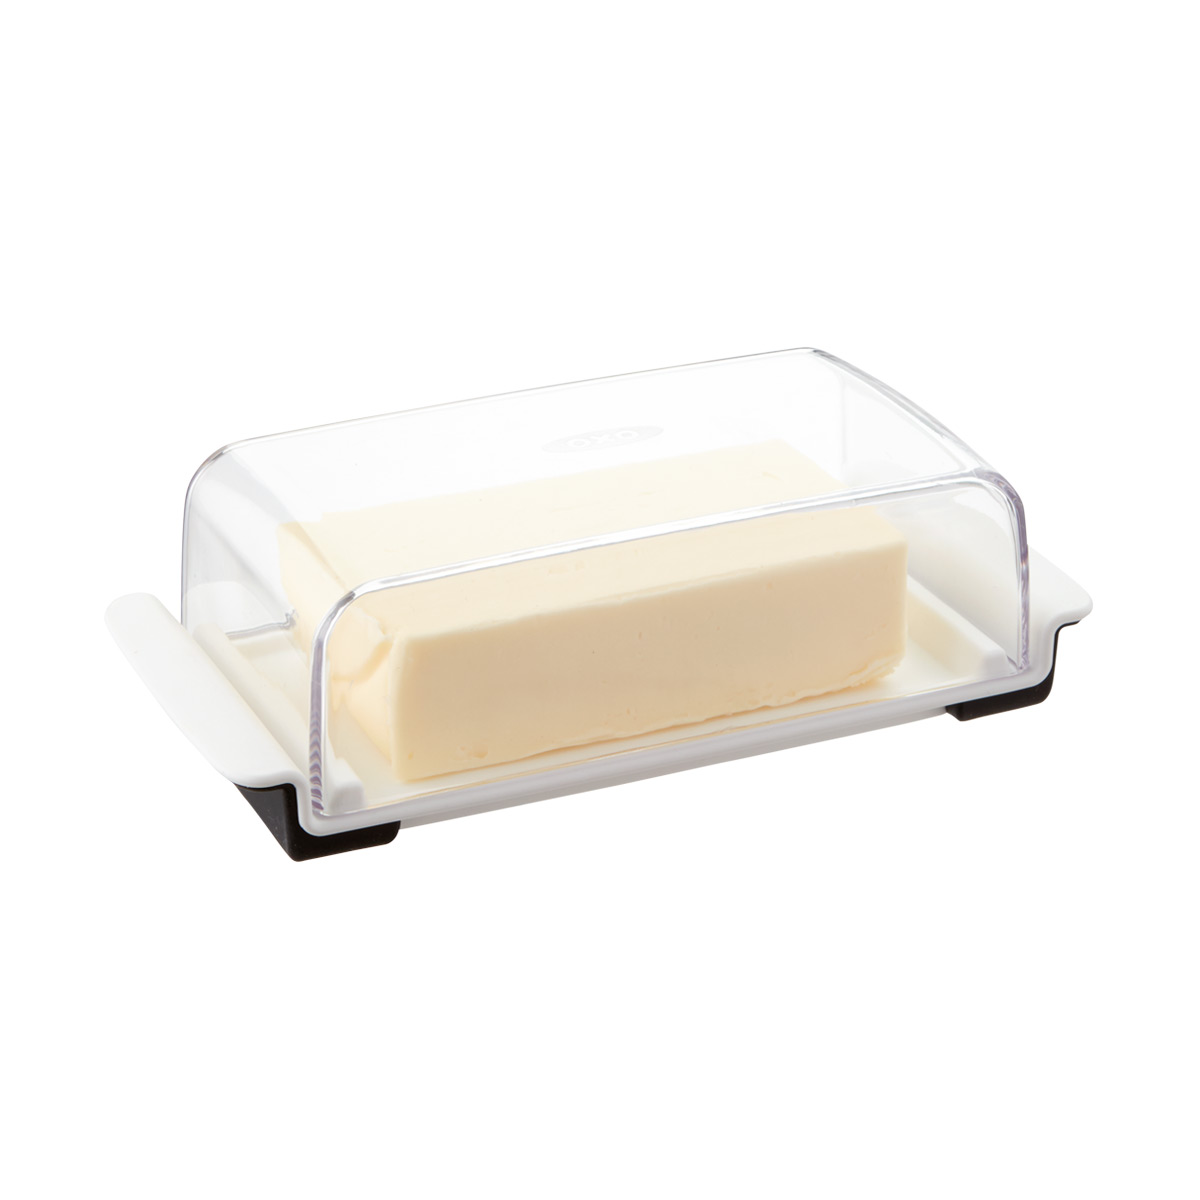 https://www.containerstore.com/catalogimages/330062/10073560-oxo-wide-butter-dish.jpg